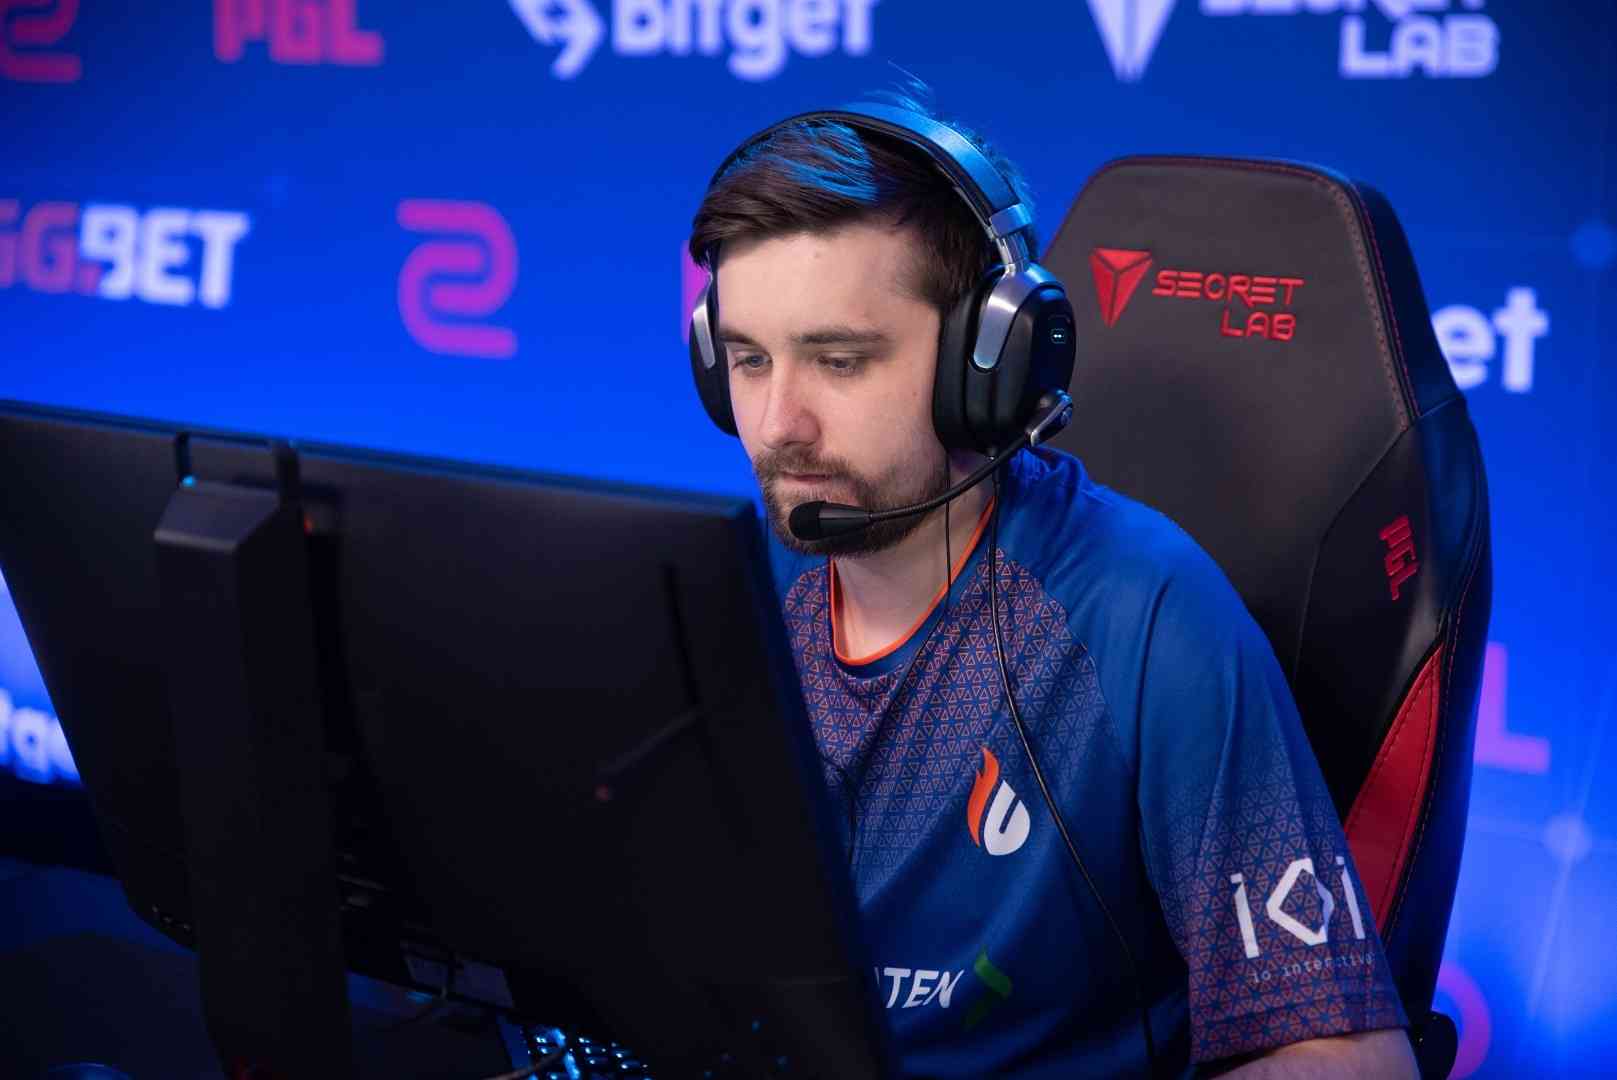 Rasmus "HooXi" Nielsen competes with the Copenhagen Flames during the PGL Stockholm Major 2021